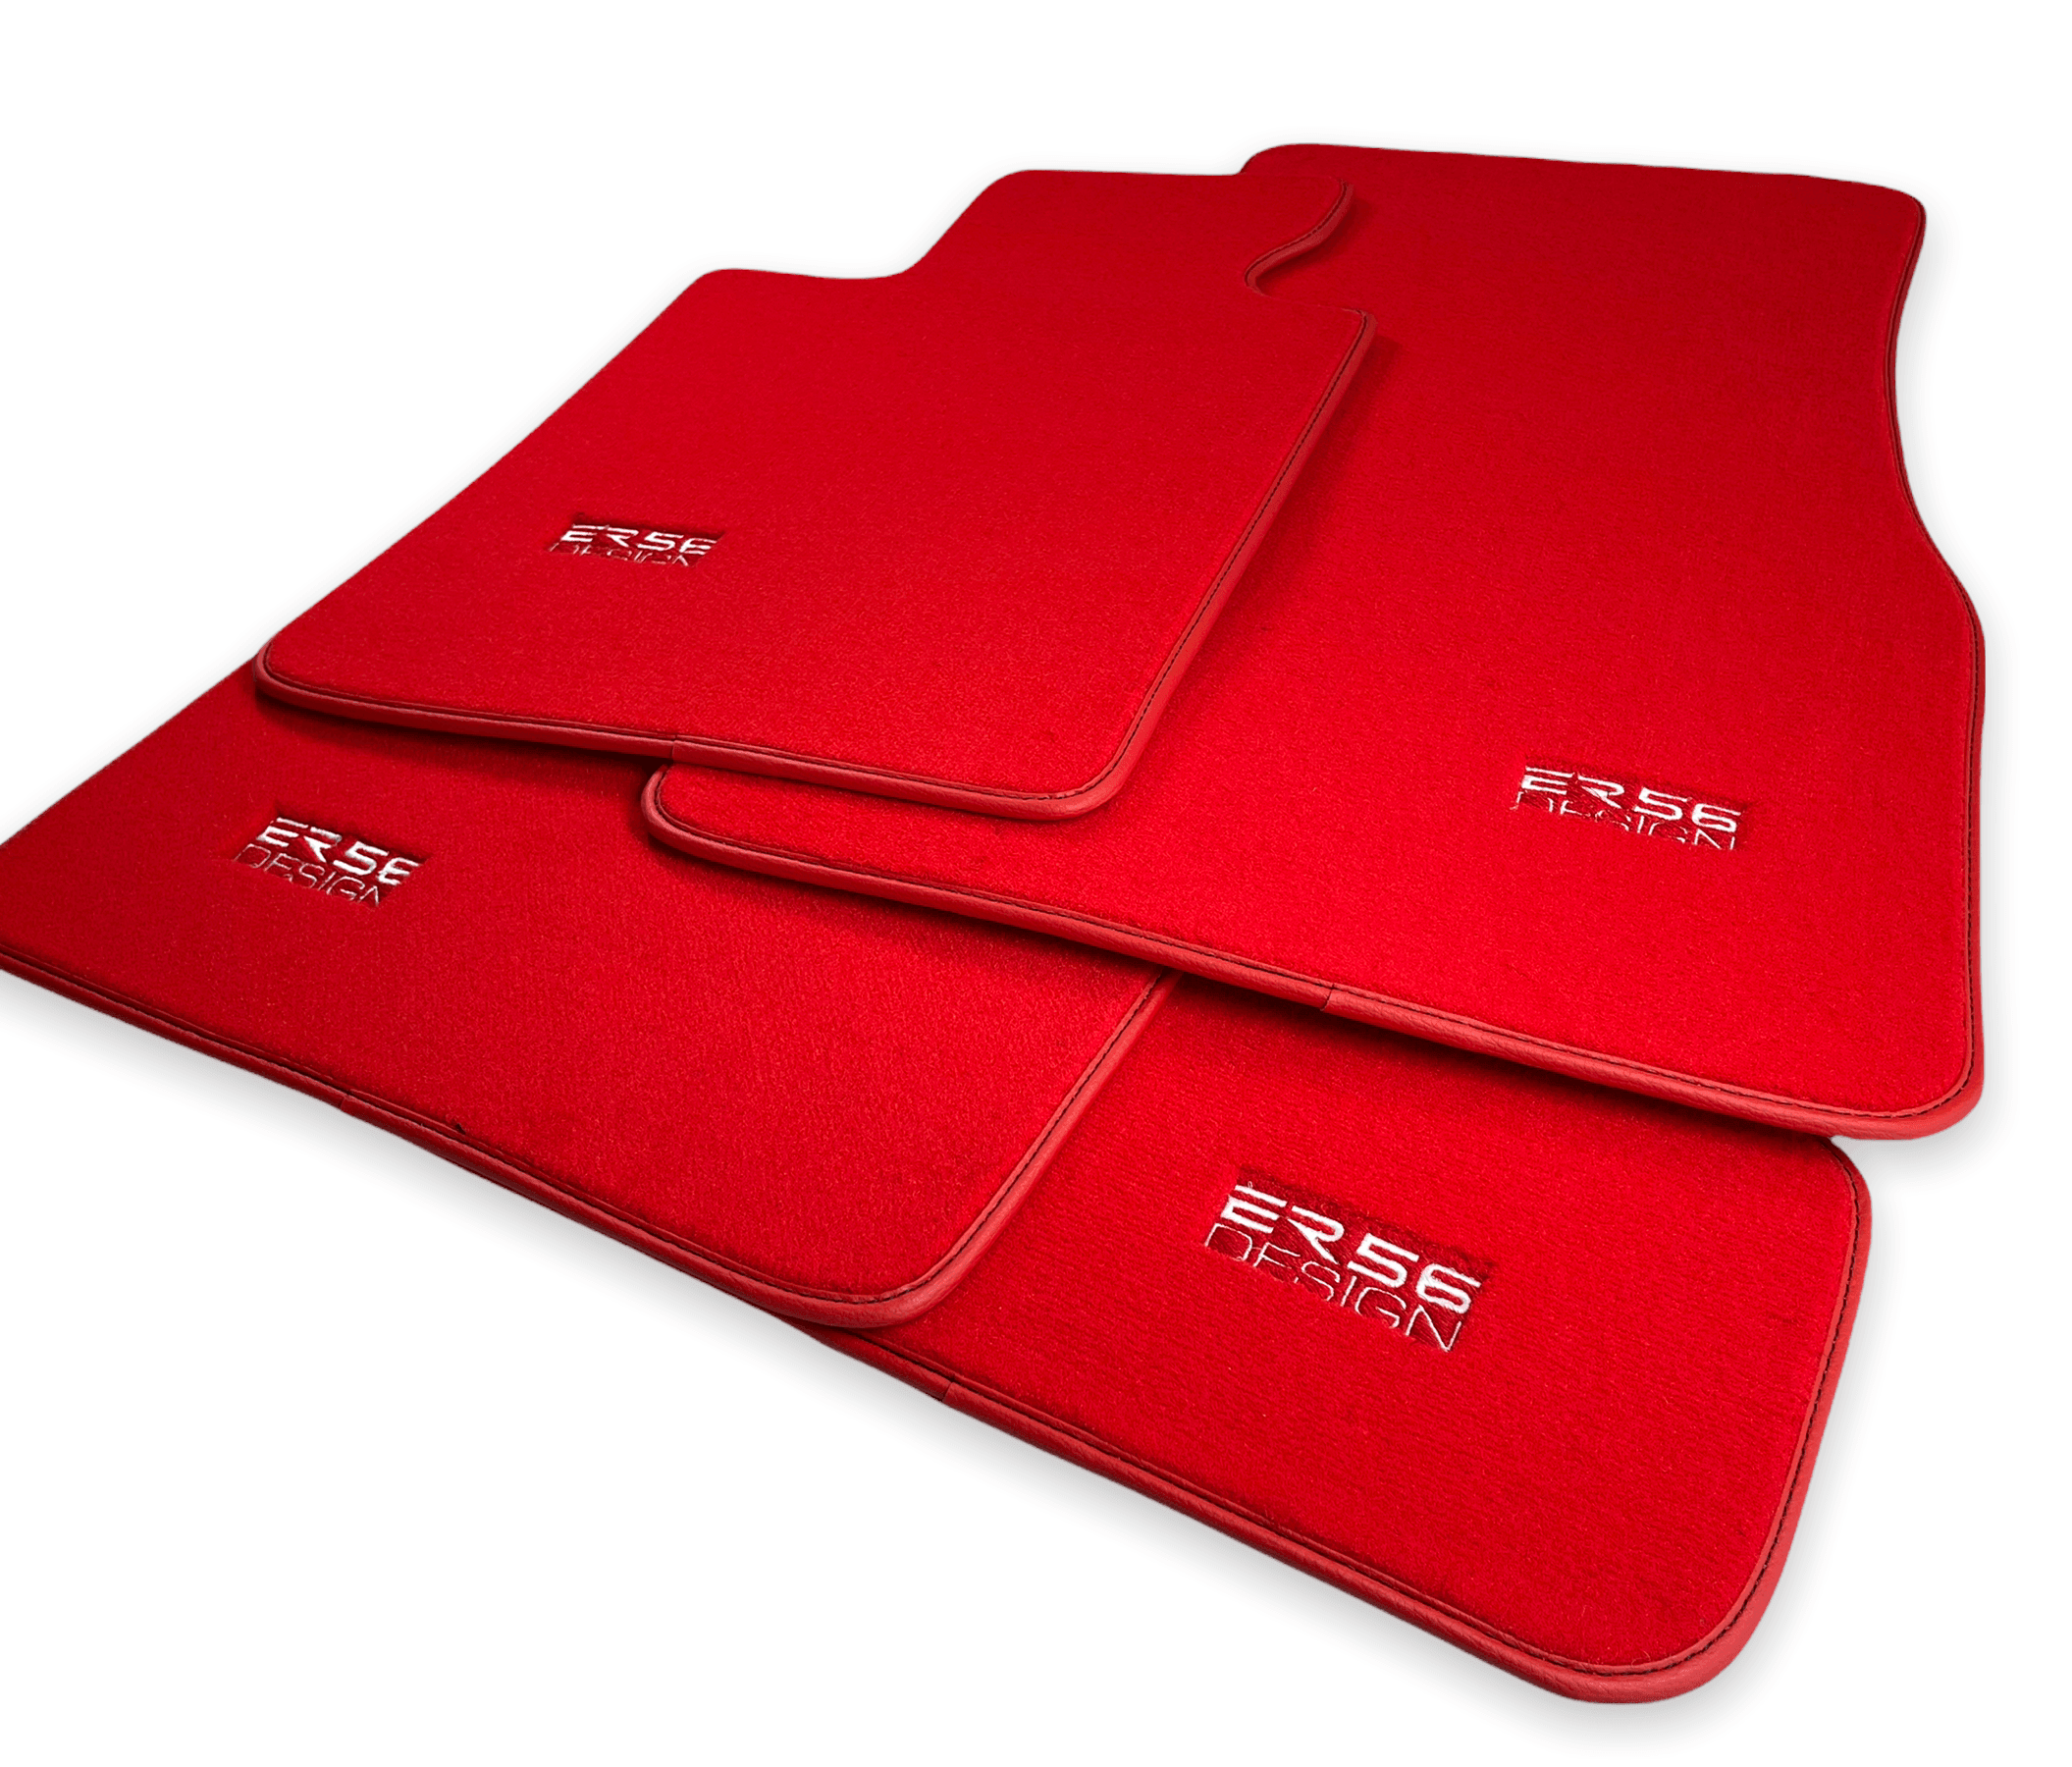 Red Mats For BMW M8 F92 2-door Coupe - ER56 Design Brand - AutoWin